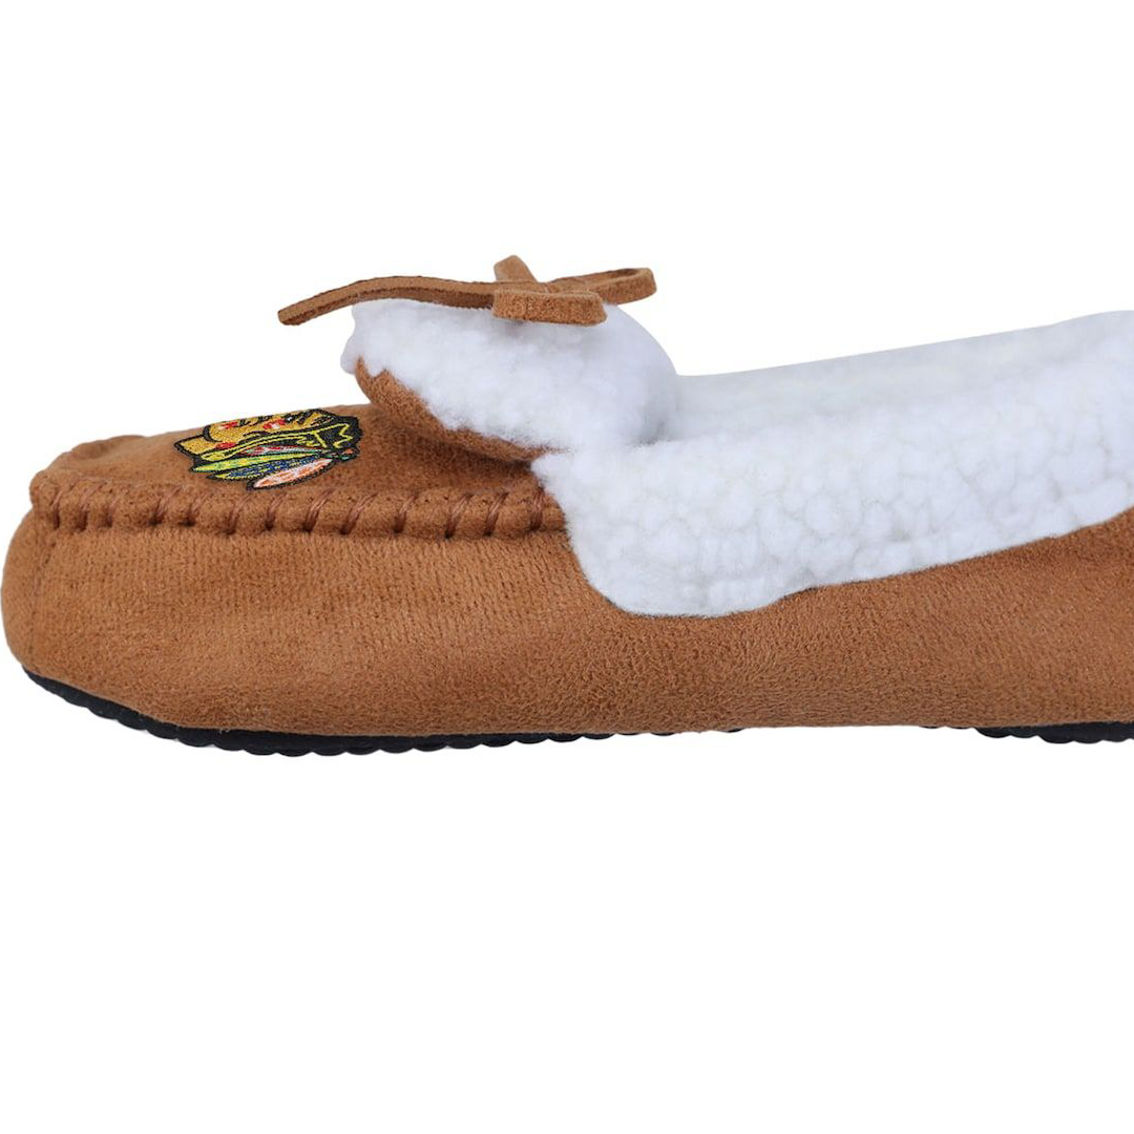 FOCO Youth Chicago Blackhawks Moccasin Slippers - Image 3 of 4